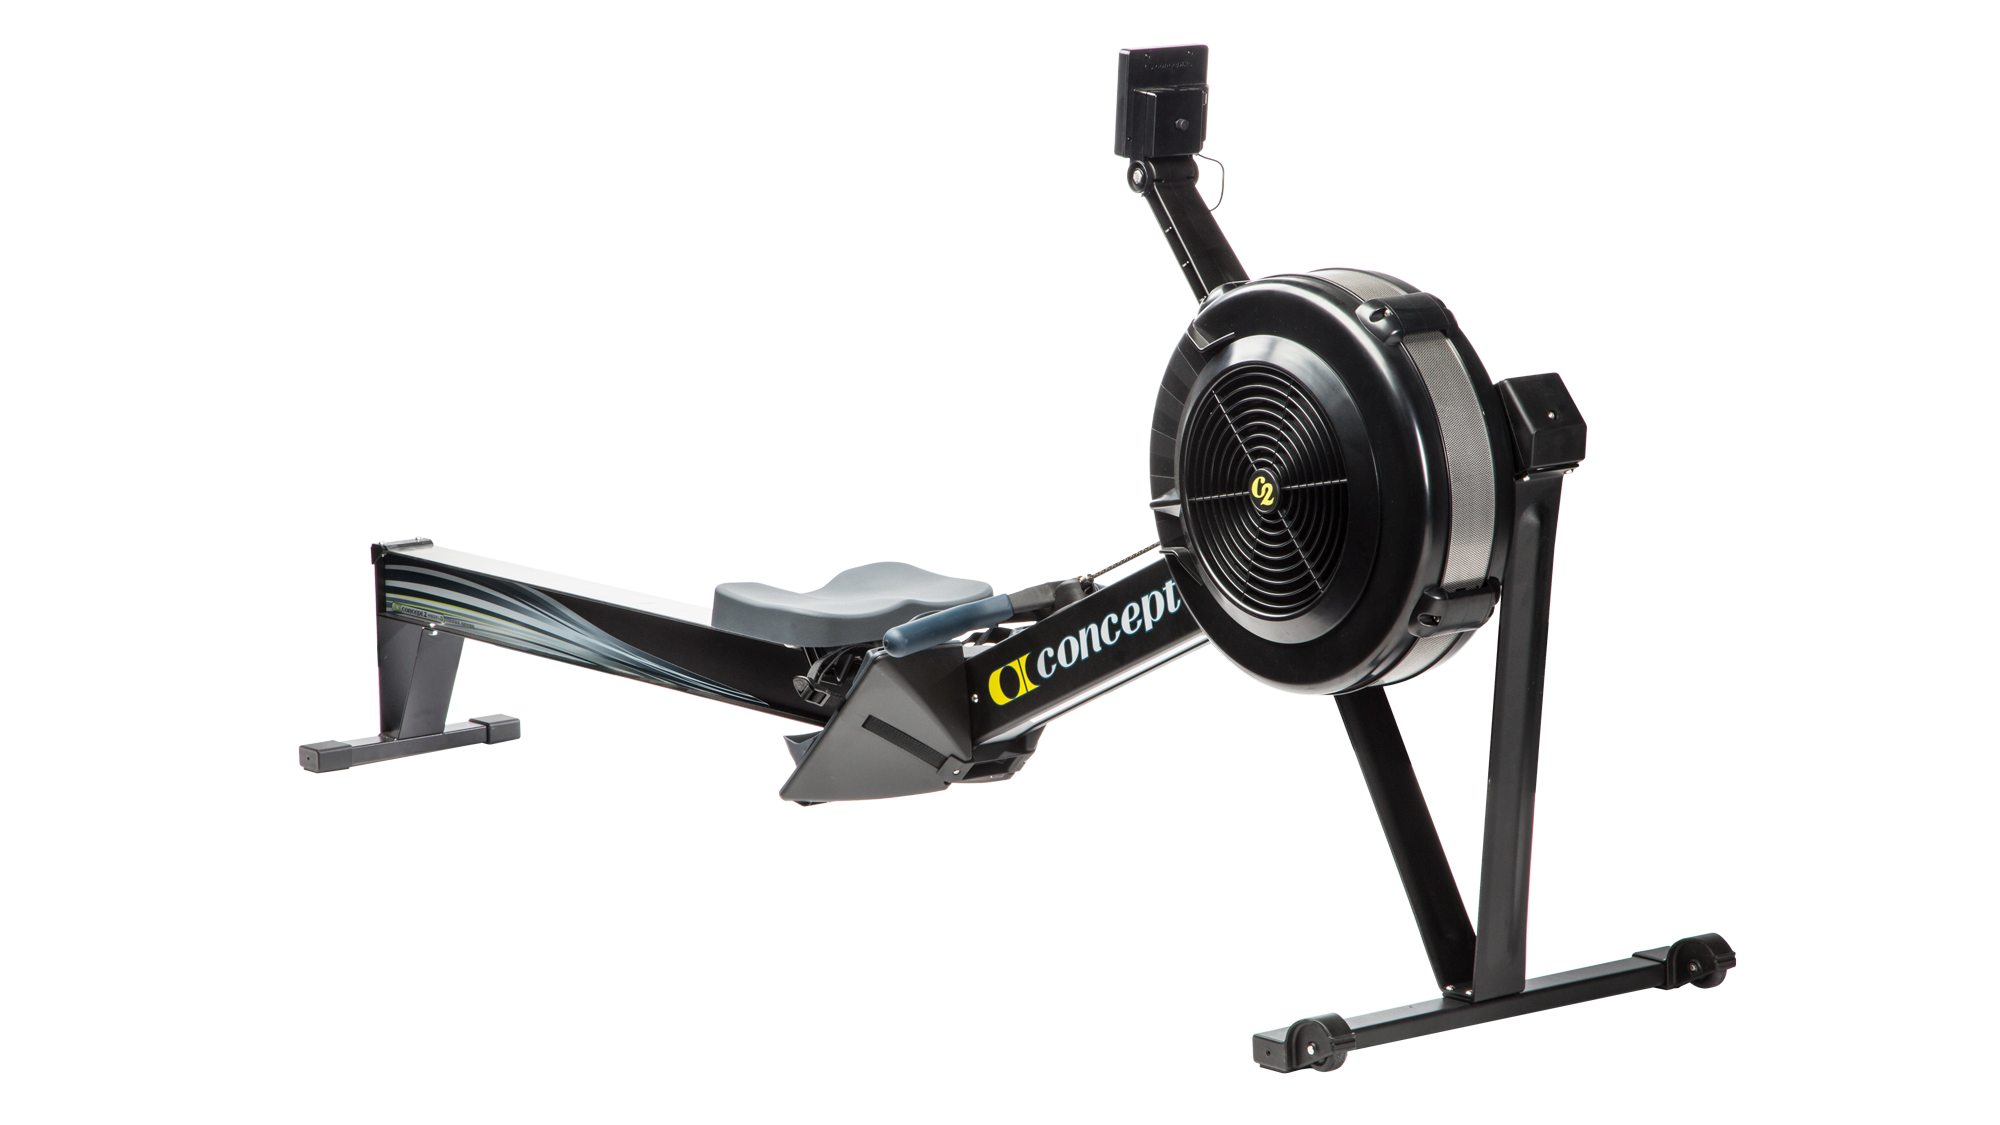 Black Concept 2 RowErg Rower - PM5 - 10-Pack